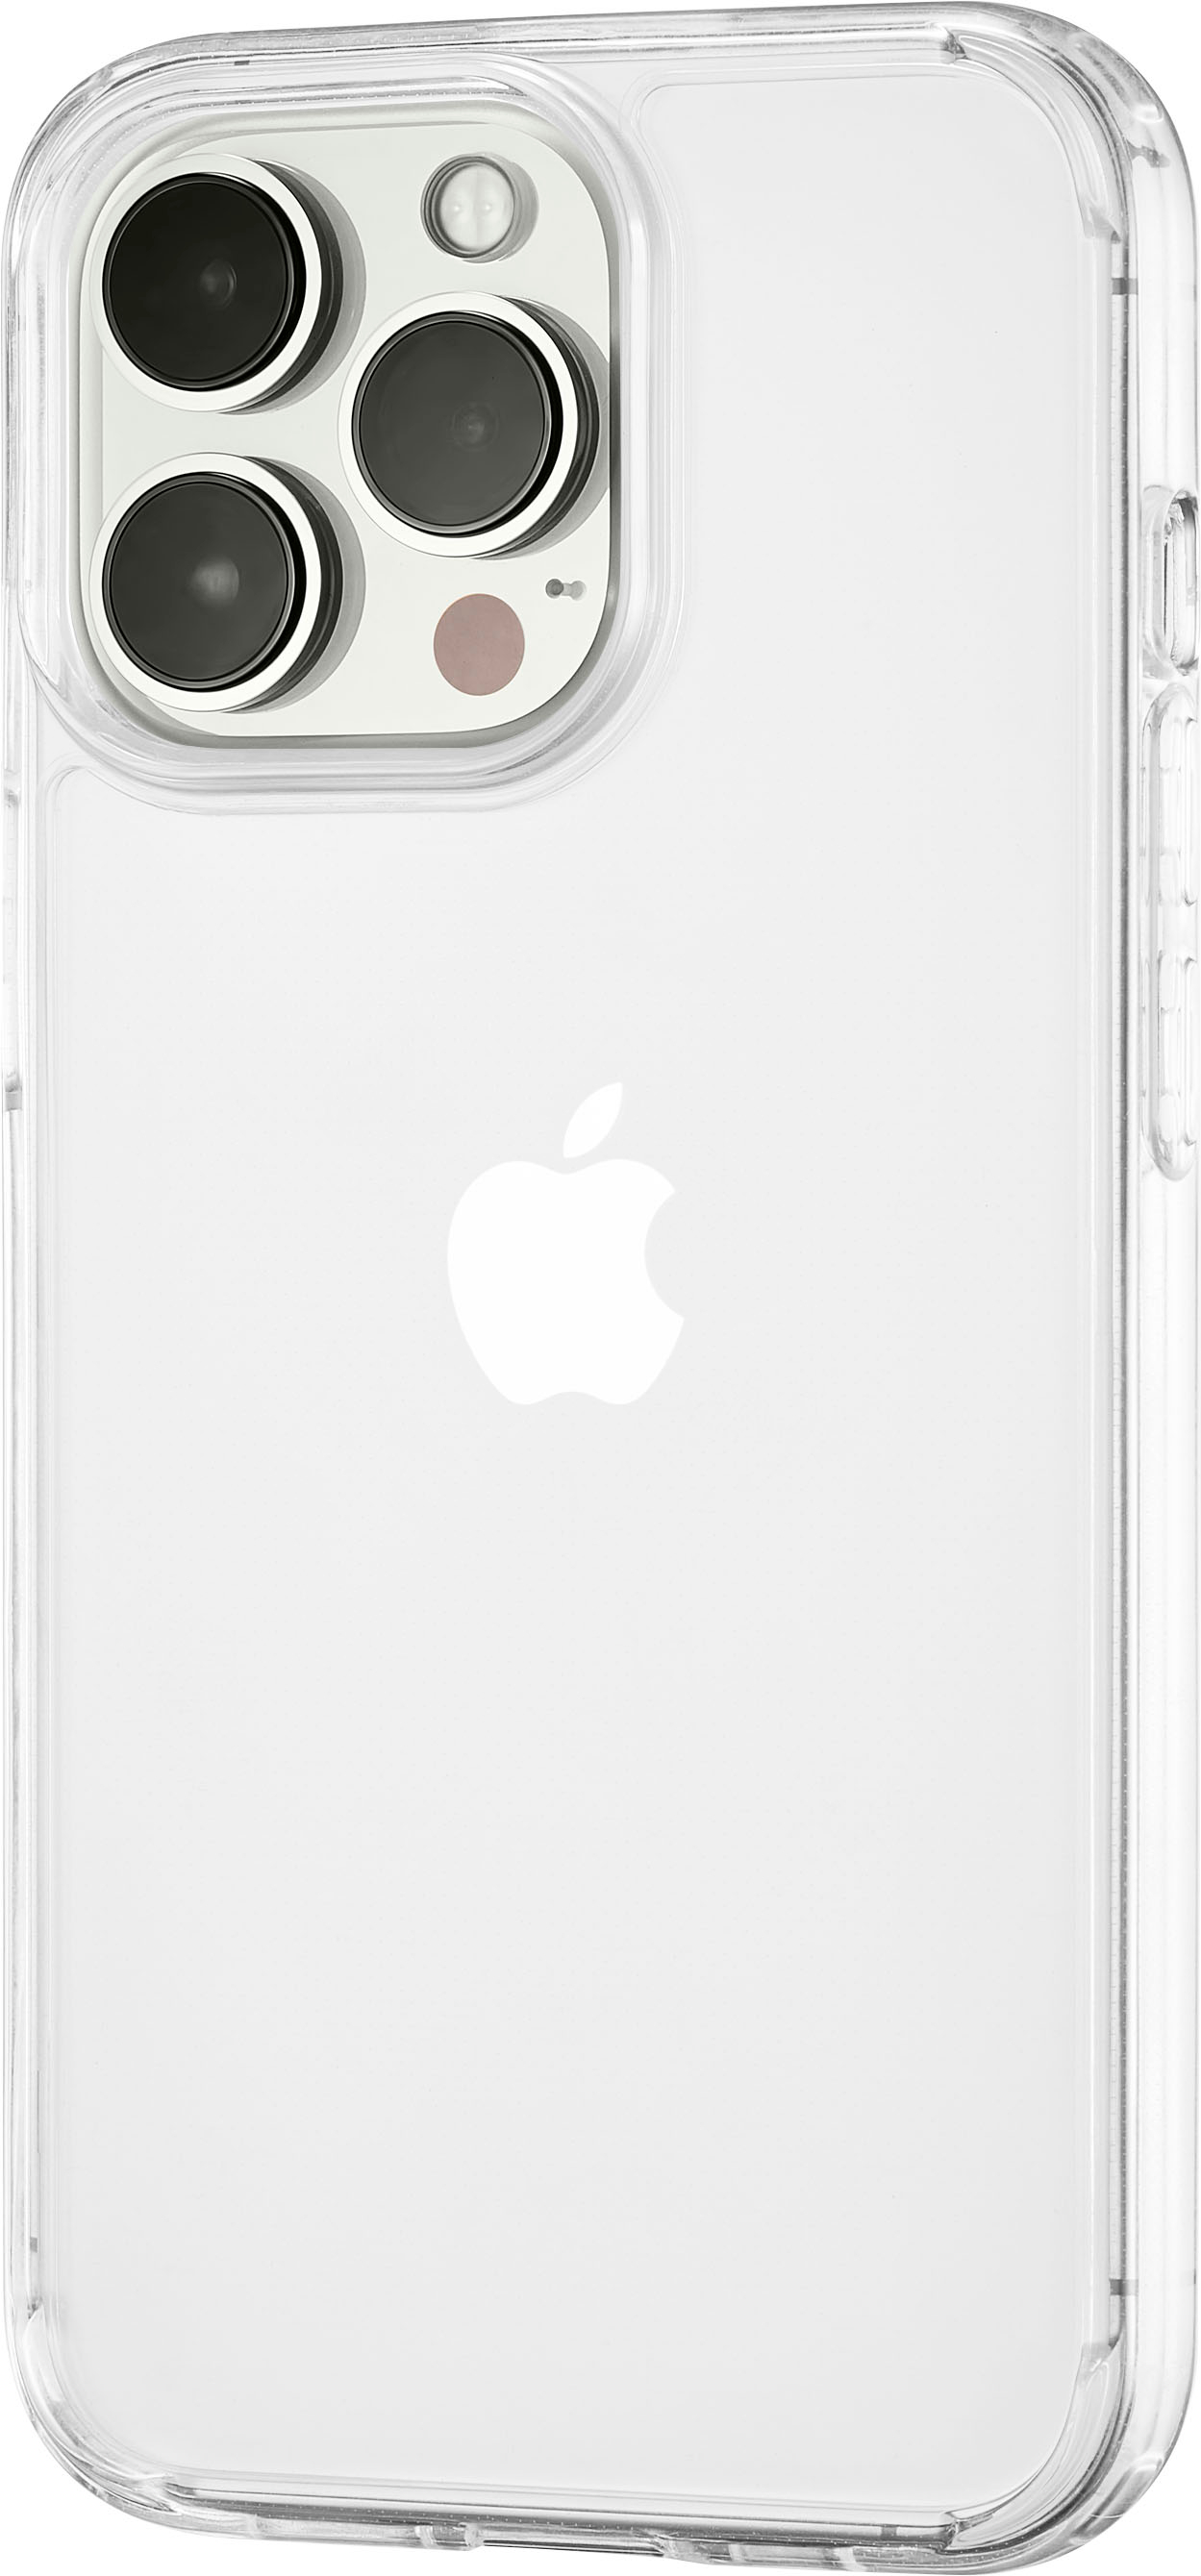 Case for Apple iPhone 11 /6.1 Clear Transparent Matching Circle Design  Hybrid TPU Hard [Support Magsafe Charger] Phone Cover fit iPhone 11 / 6.1  